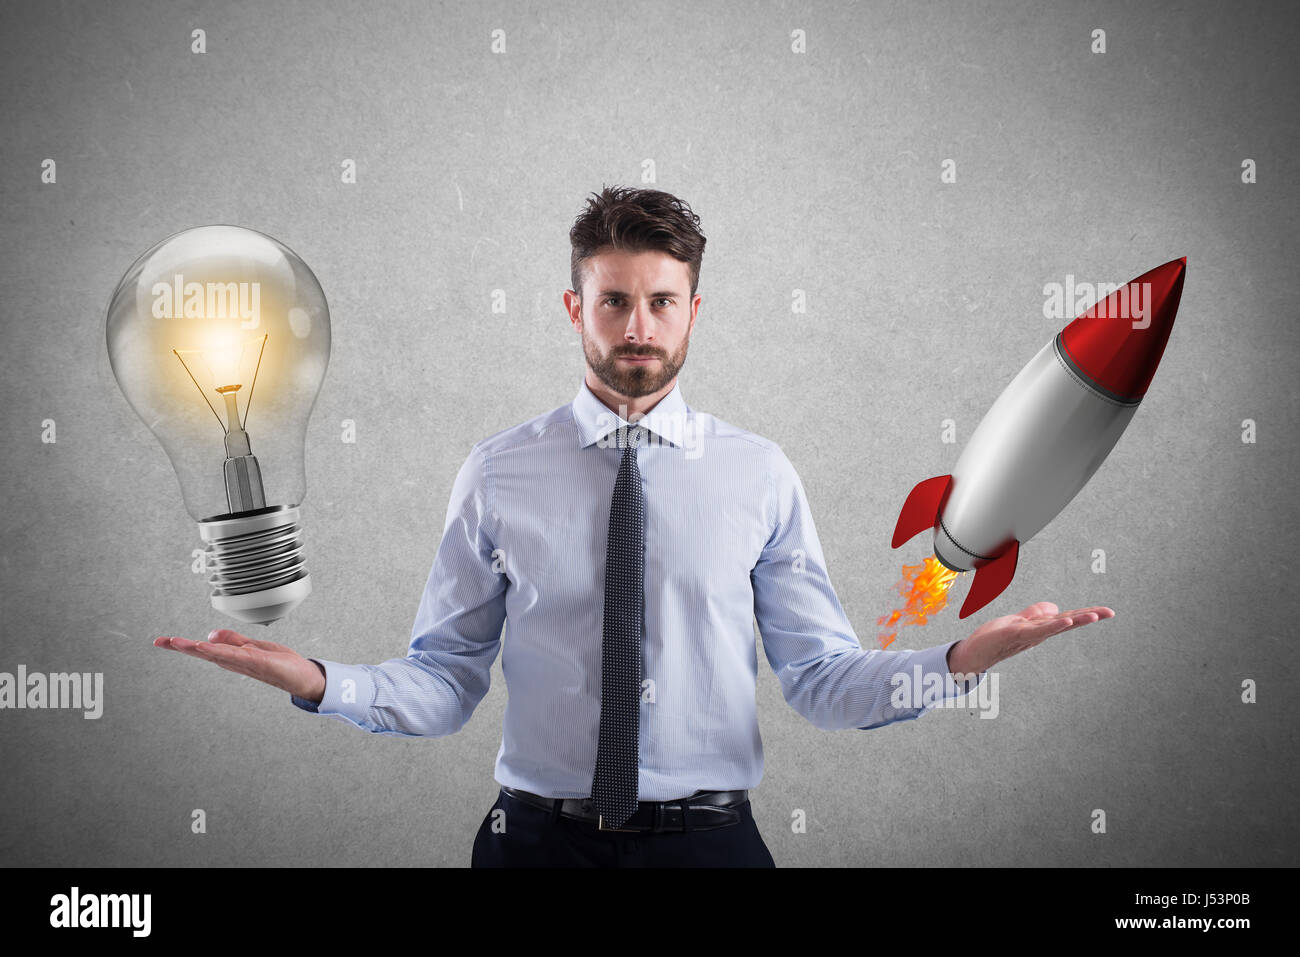 Business idea and start-up Stock Photo